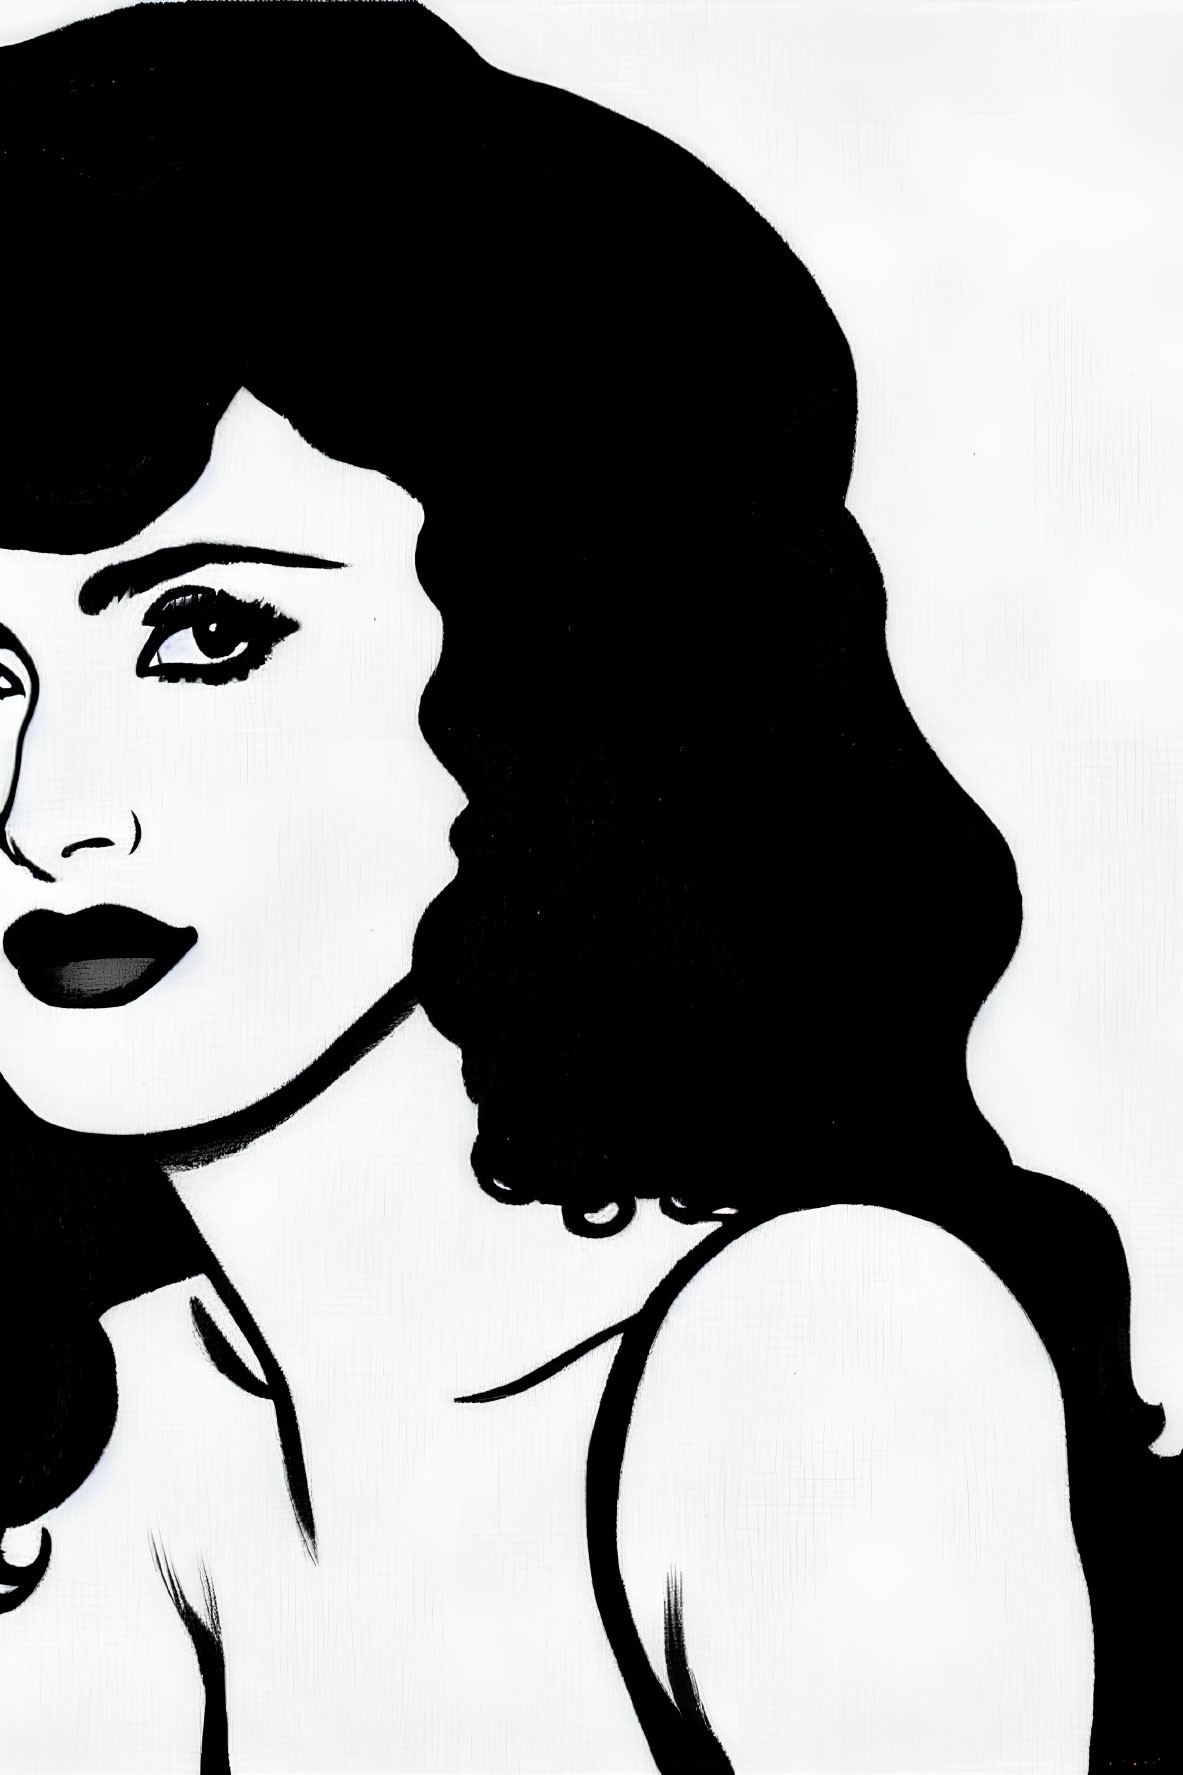 Monochrome illustration of woman with wavy hair and bold lips